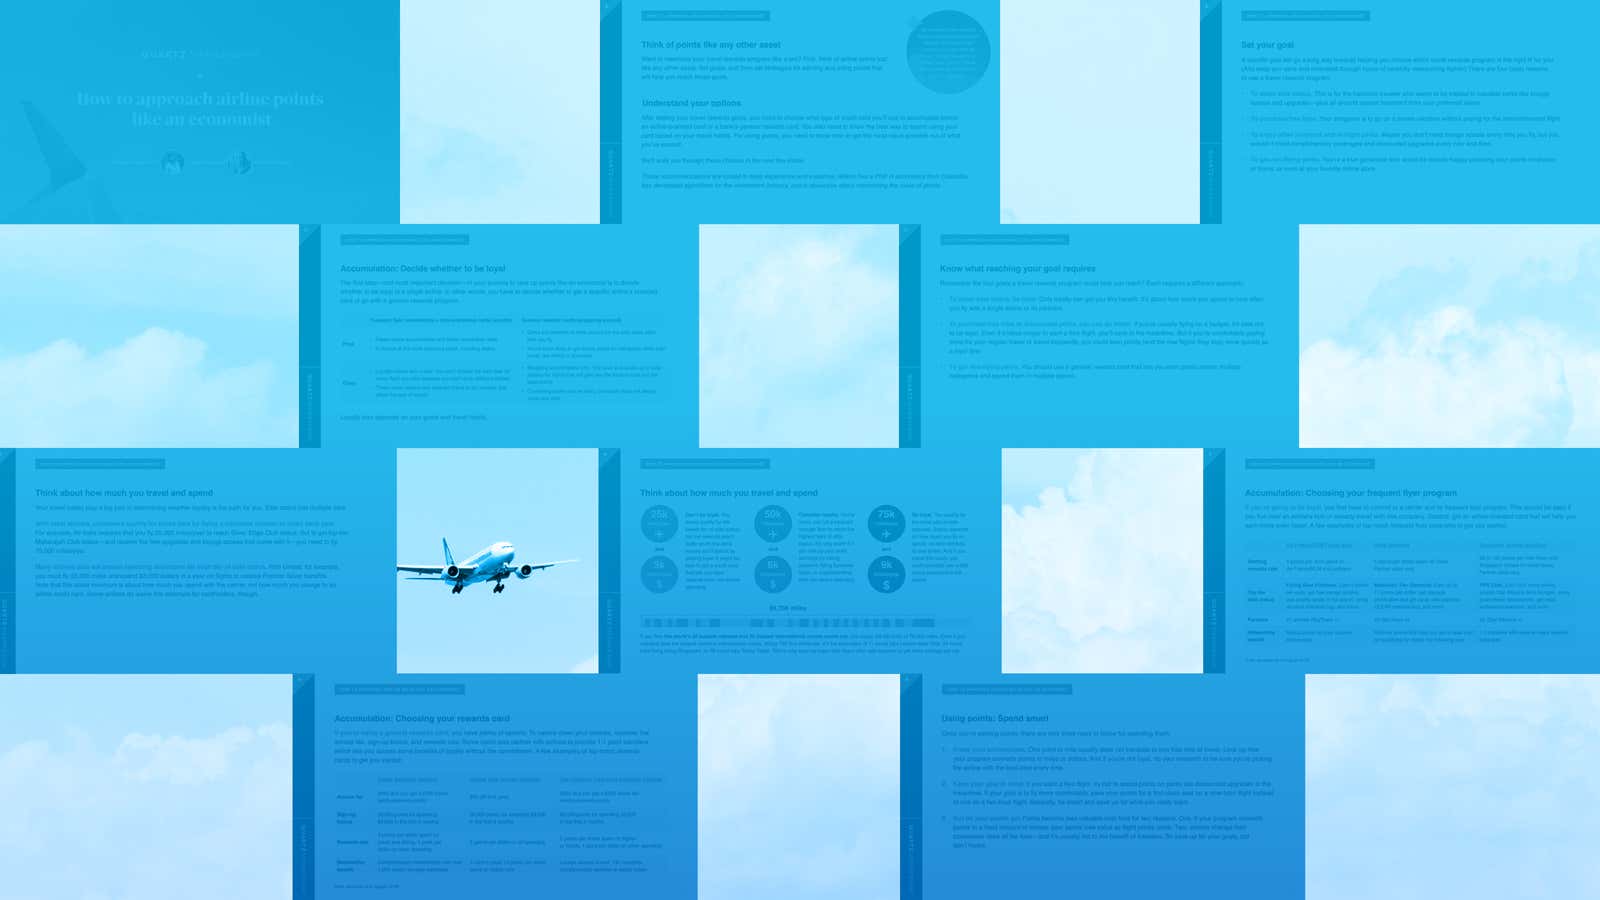 Presentation: How to approach airline points like an economist